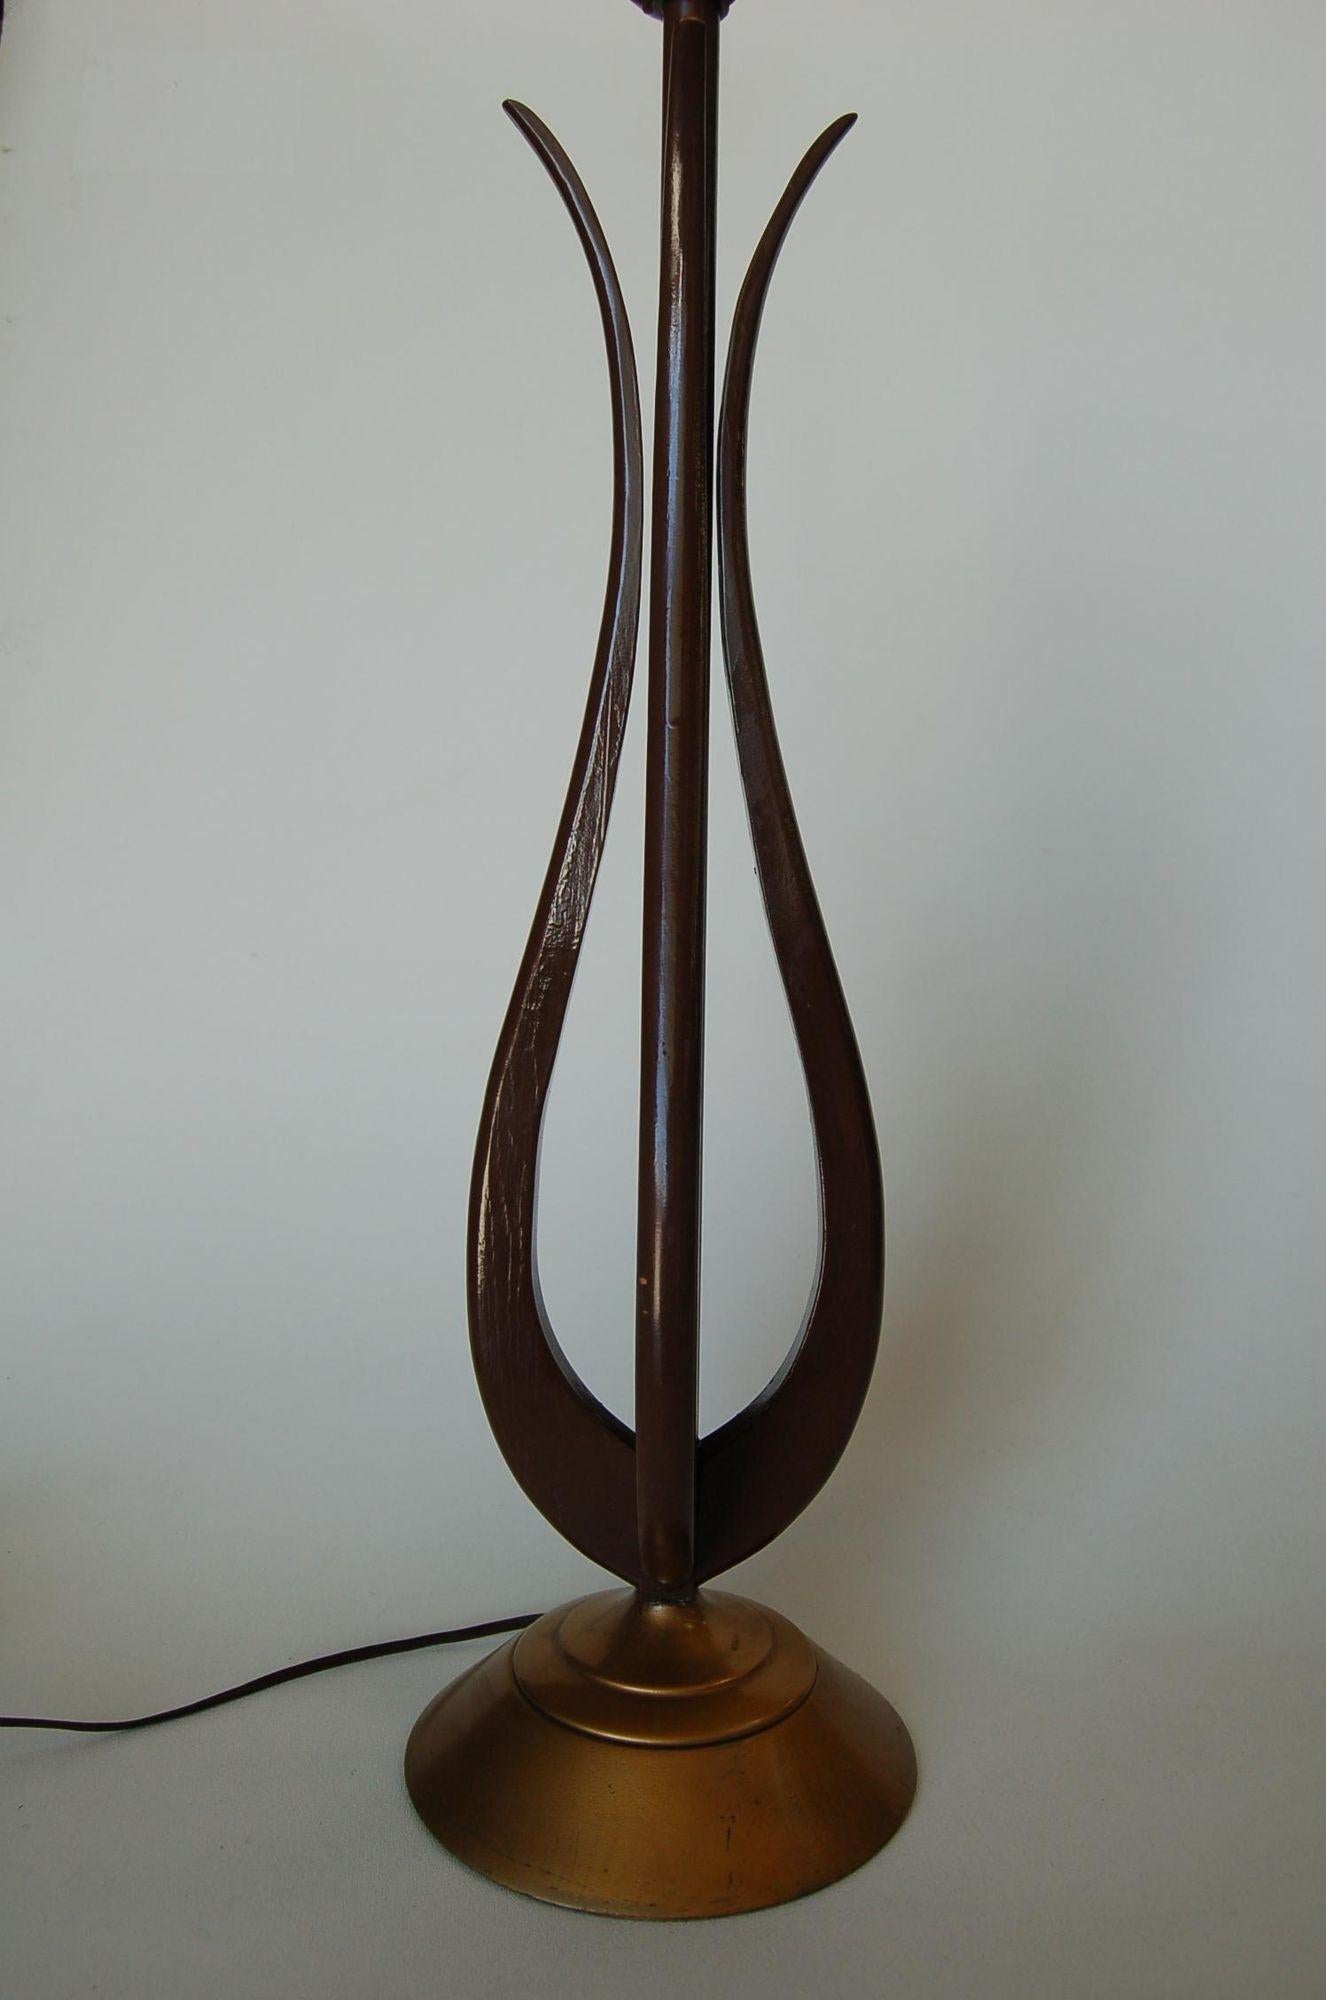 American Modernist Harp Shaped Sculptural Walnut and Brass Tone Table Lamp, Pair